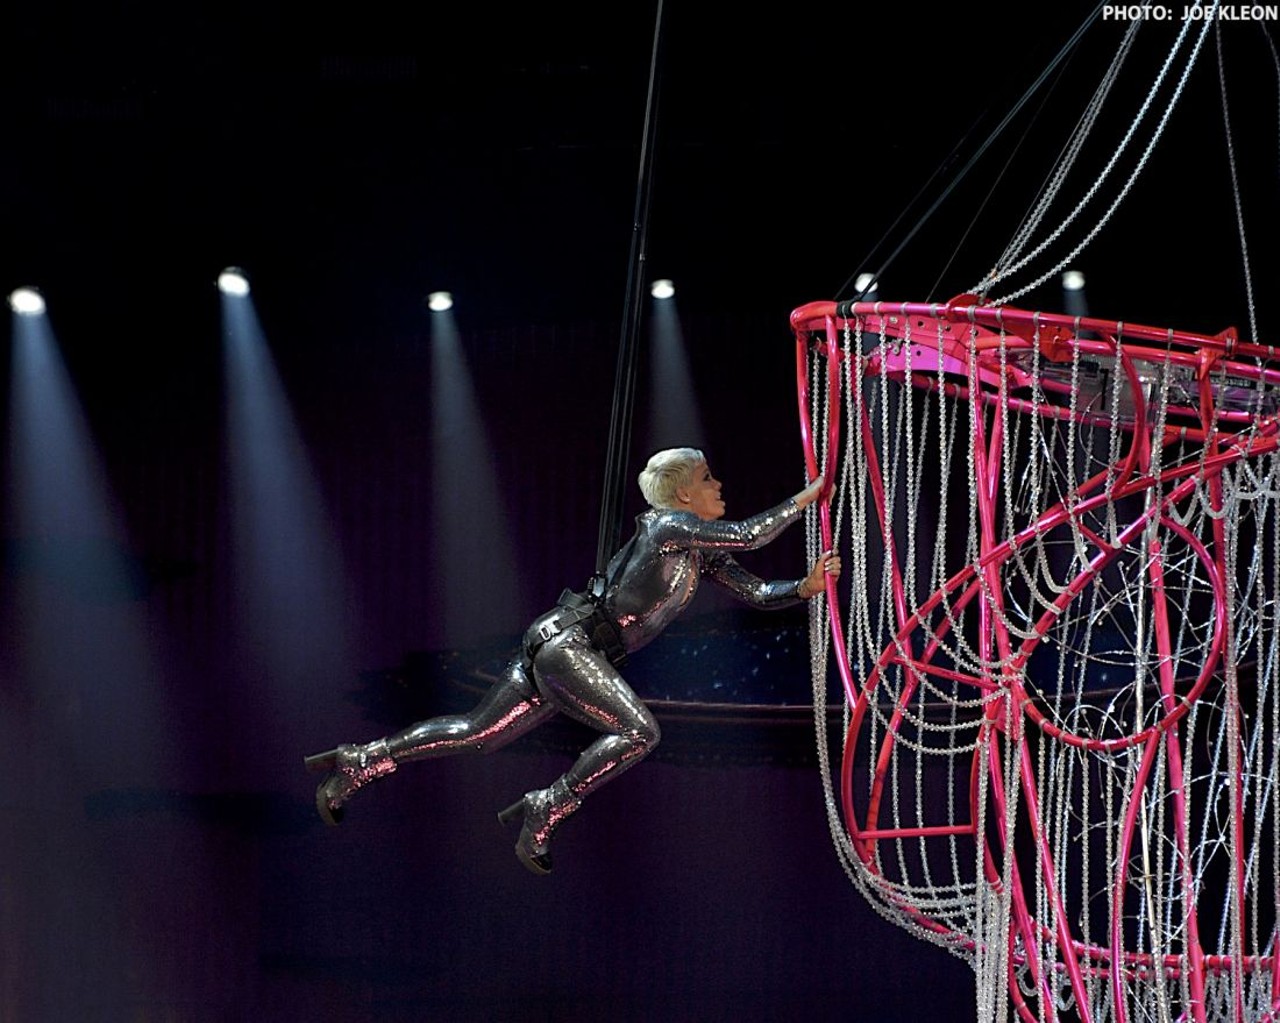 P!nk Performing at Quicken Loans Arena